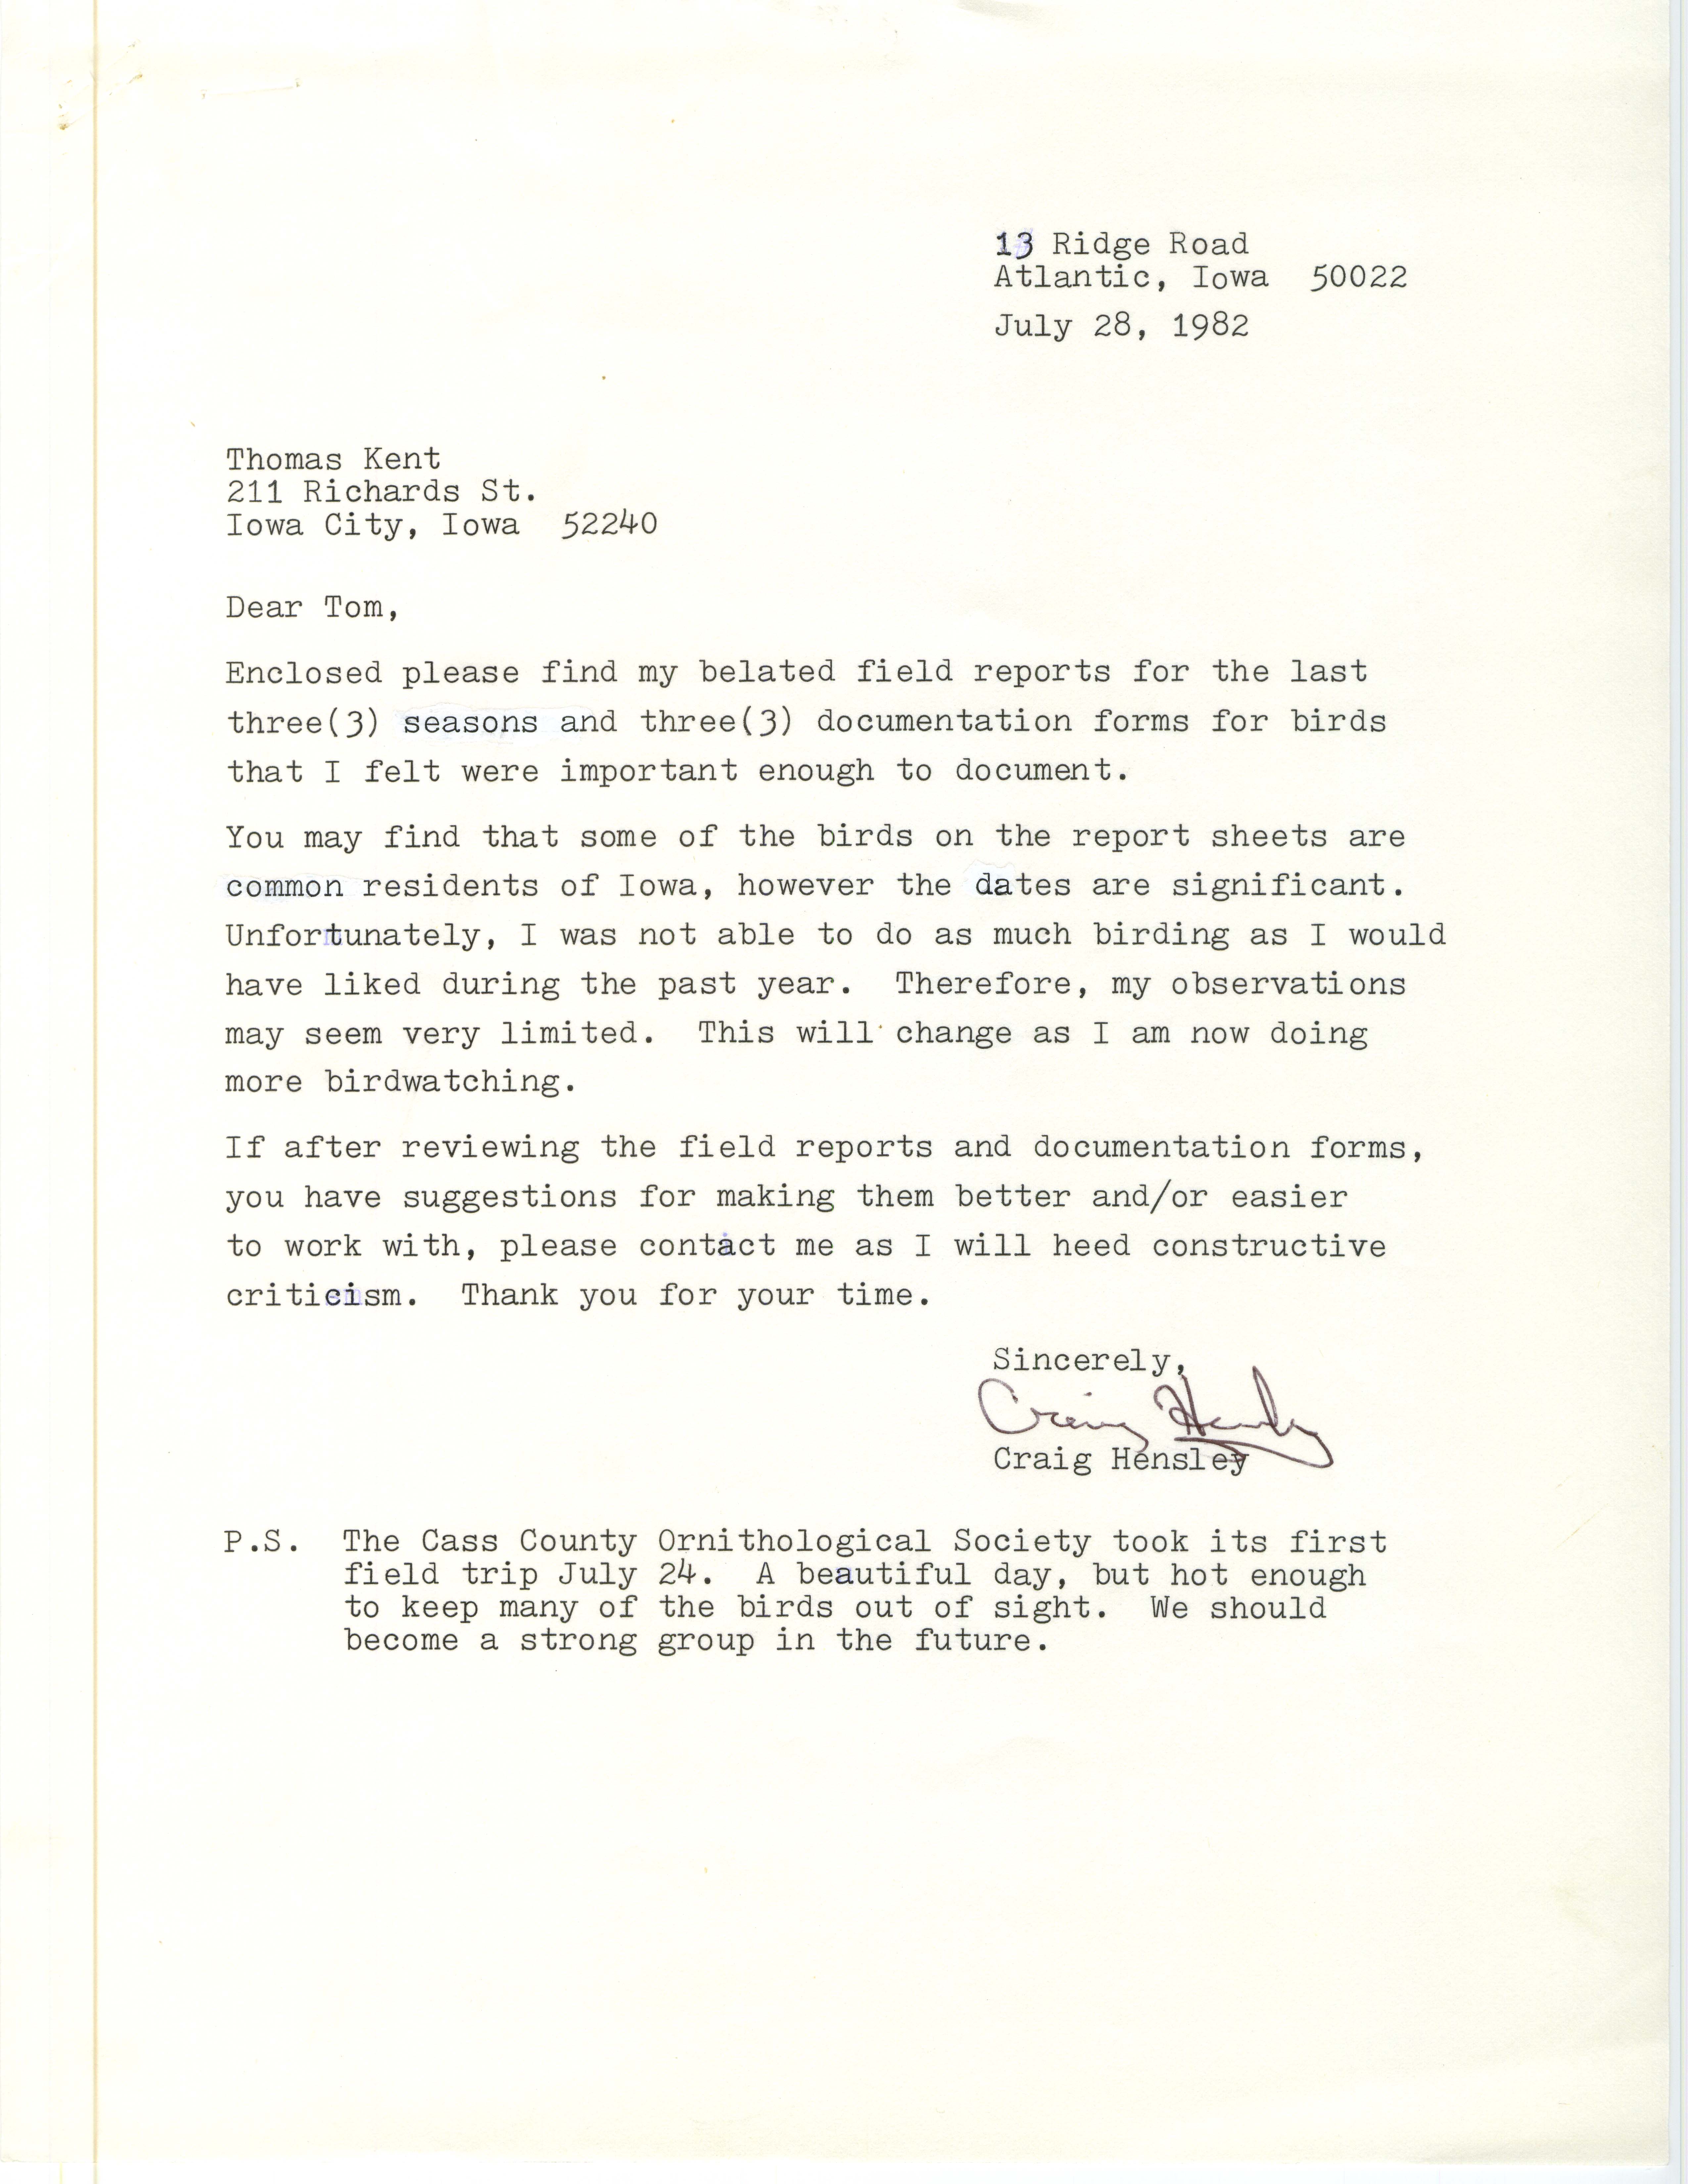 R. Craig Hensley letter to Thomas H. Kent regarding field reports , July 28, 1982